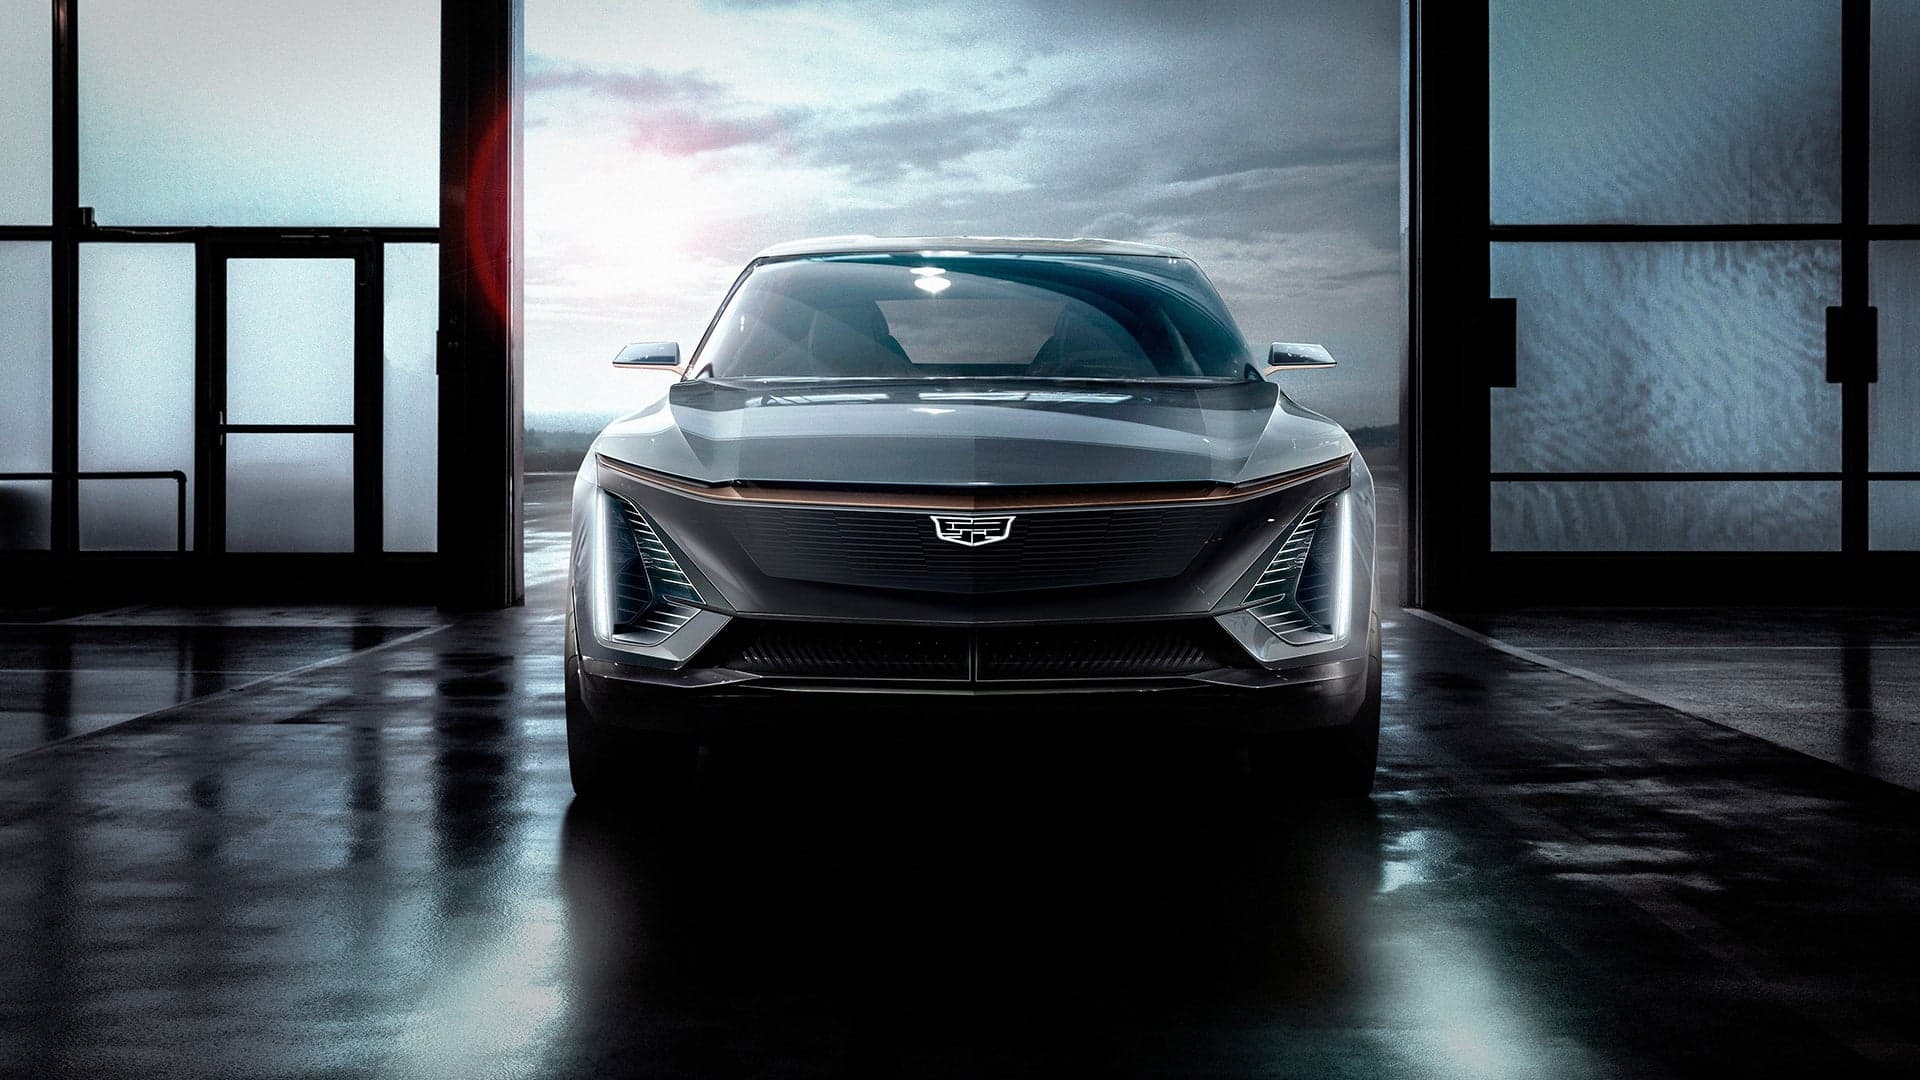 Cadillac Takes Aim at Tesla, Teases All-New Electric SUV for 2022